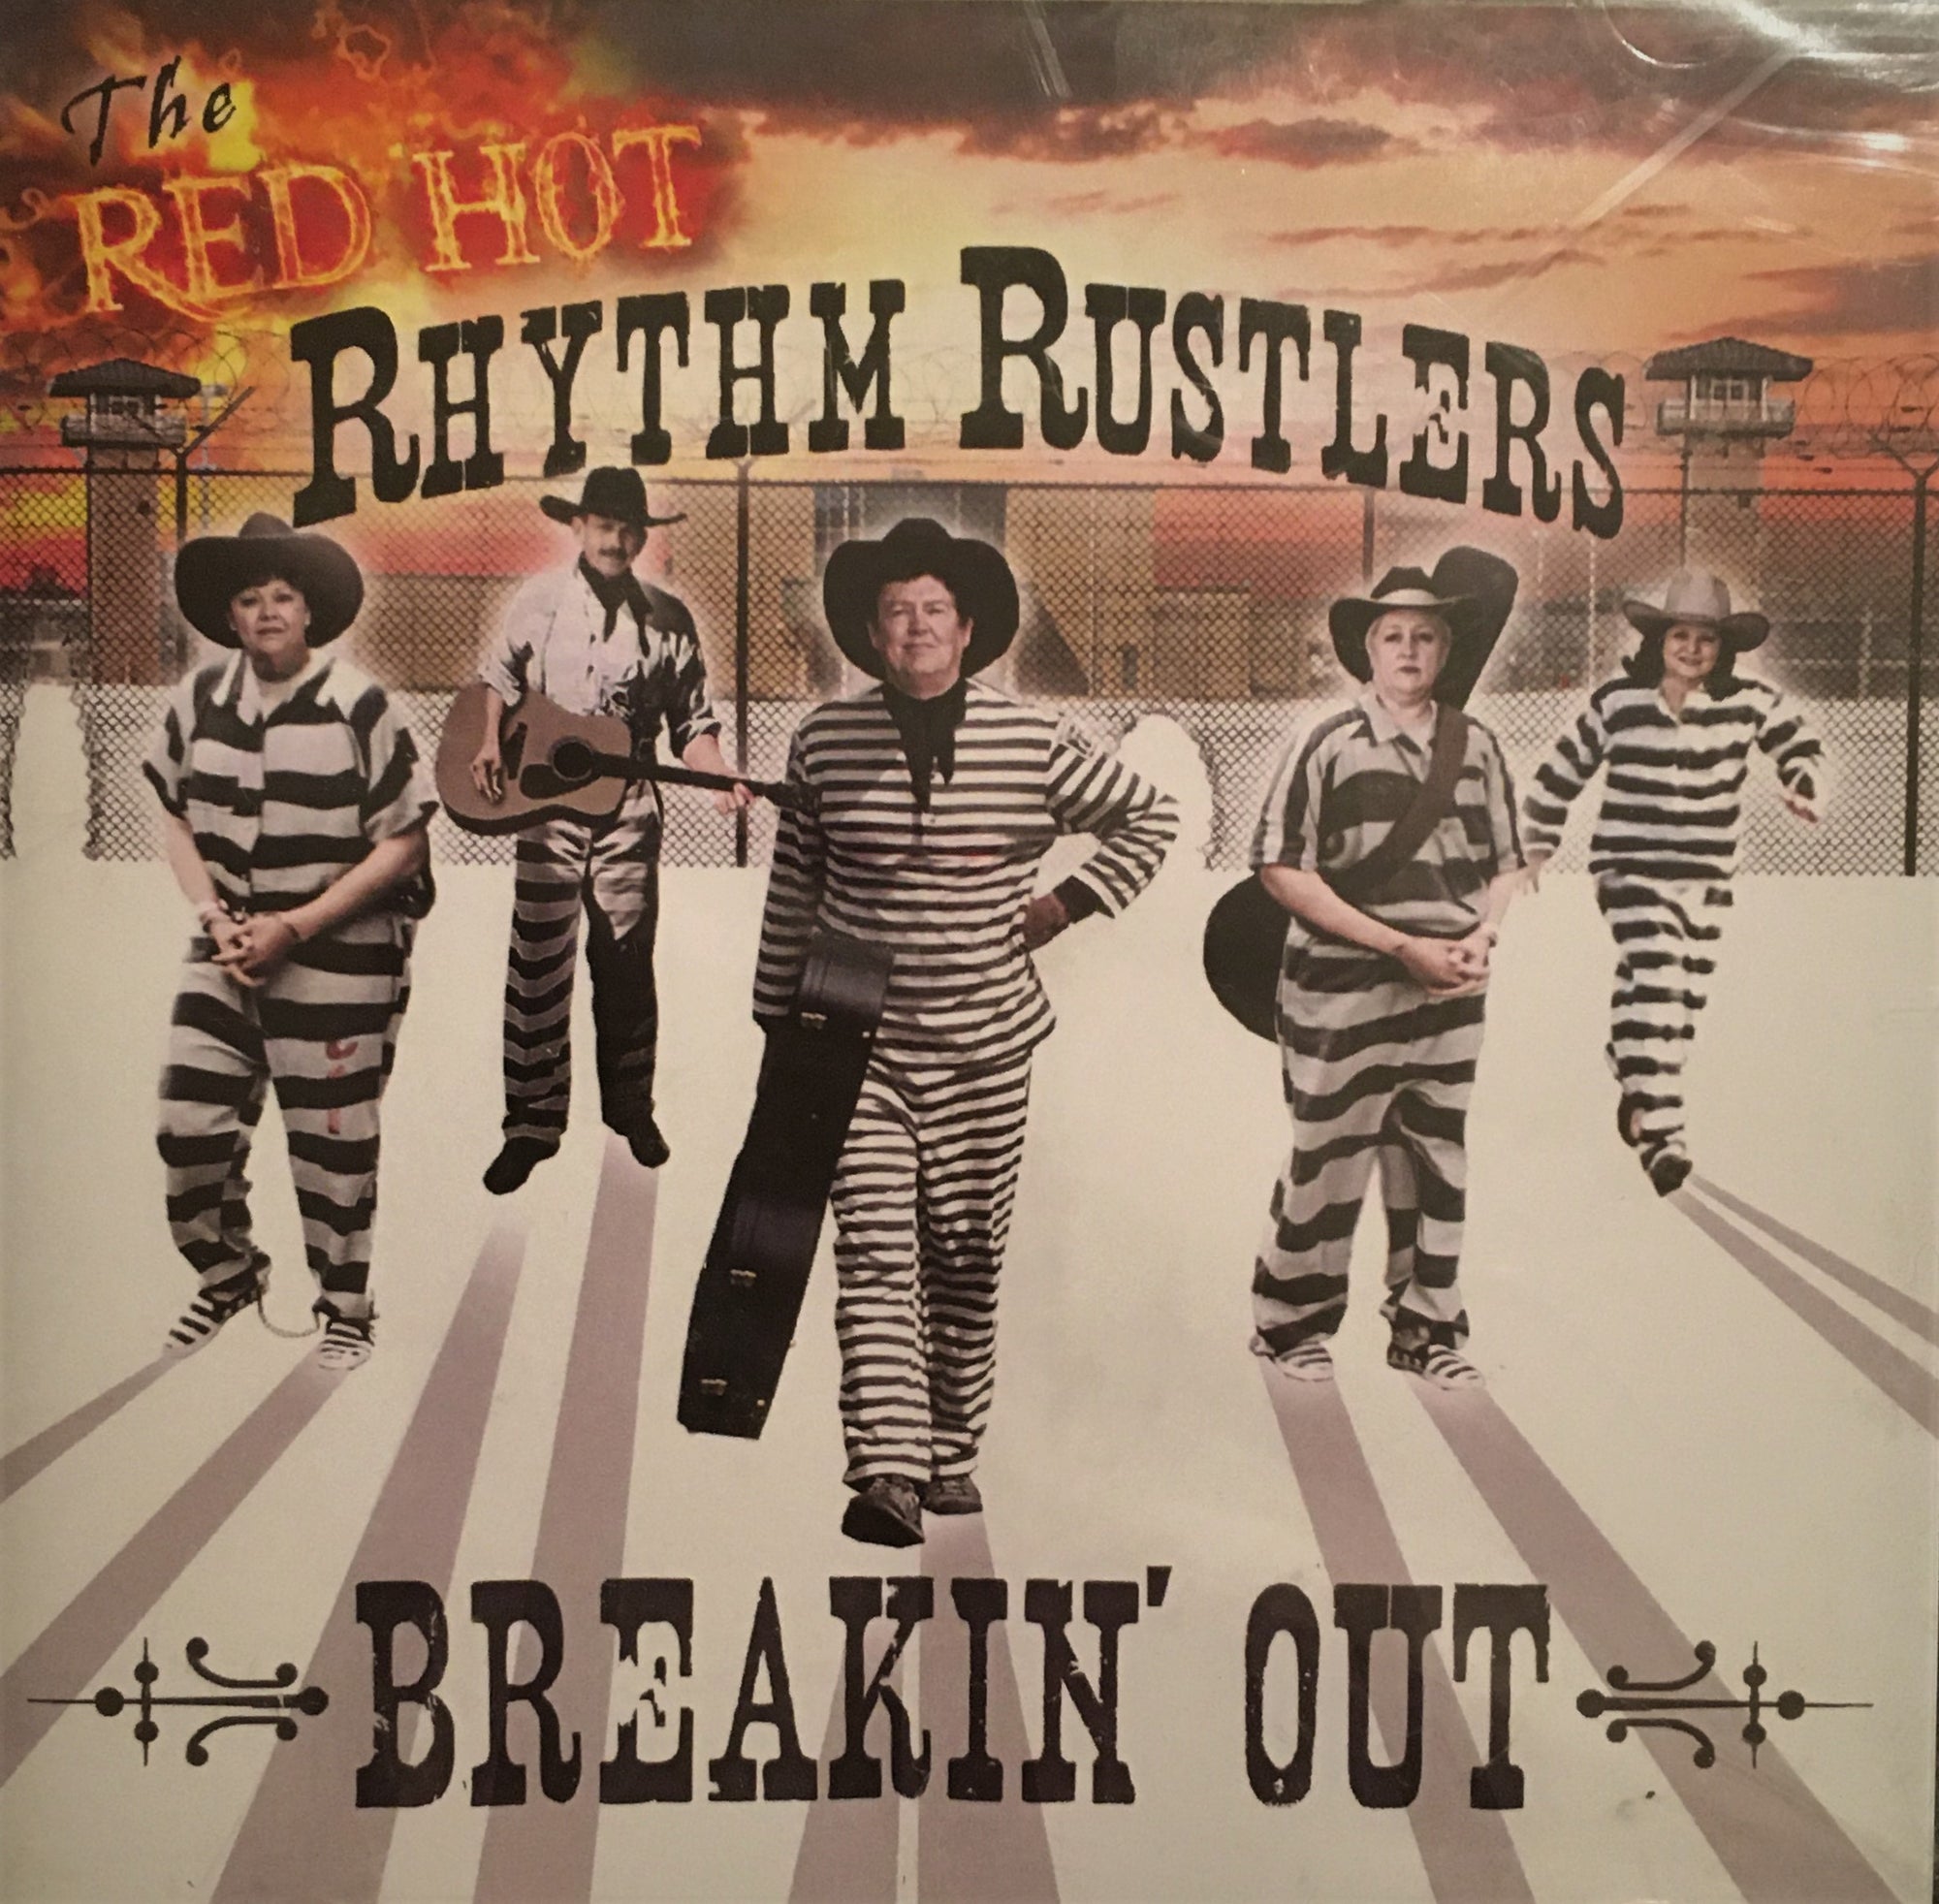 CD Breakin' Out by The Red Hot Rhythm Rustlers